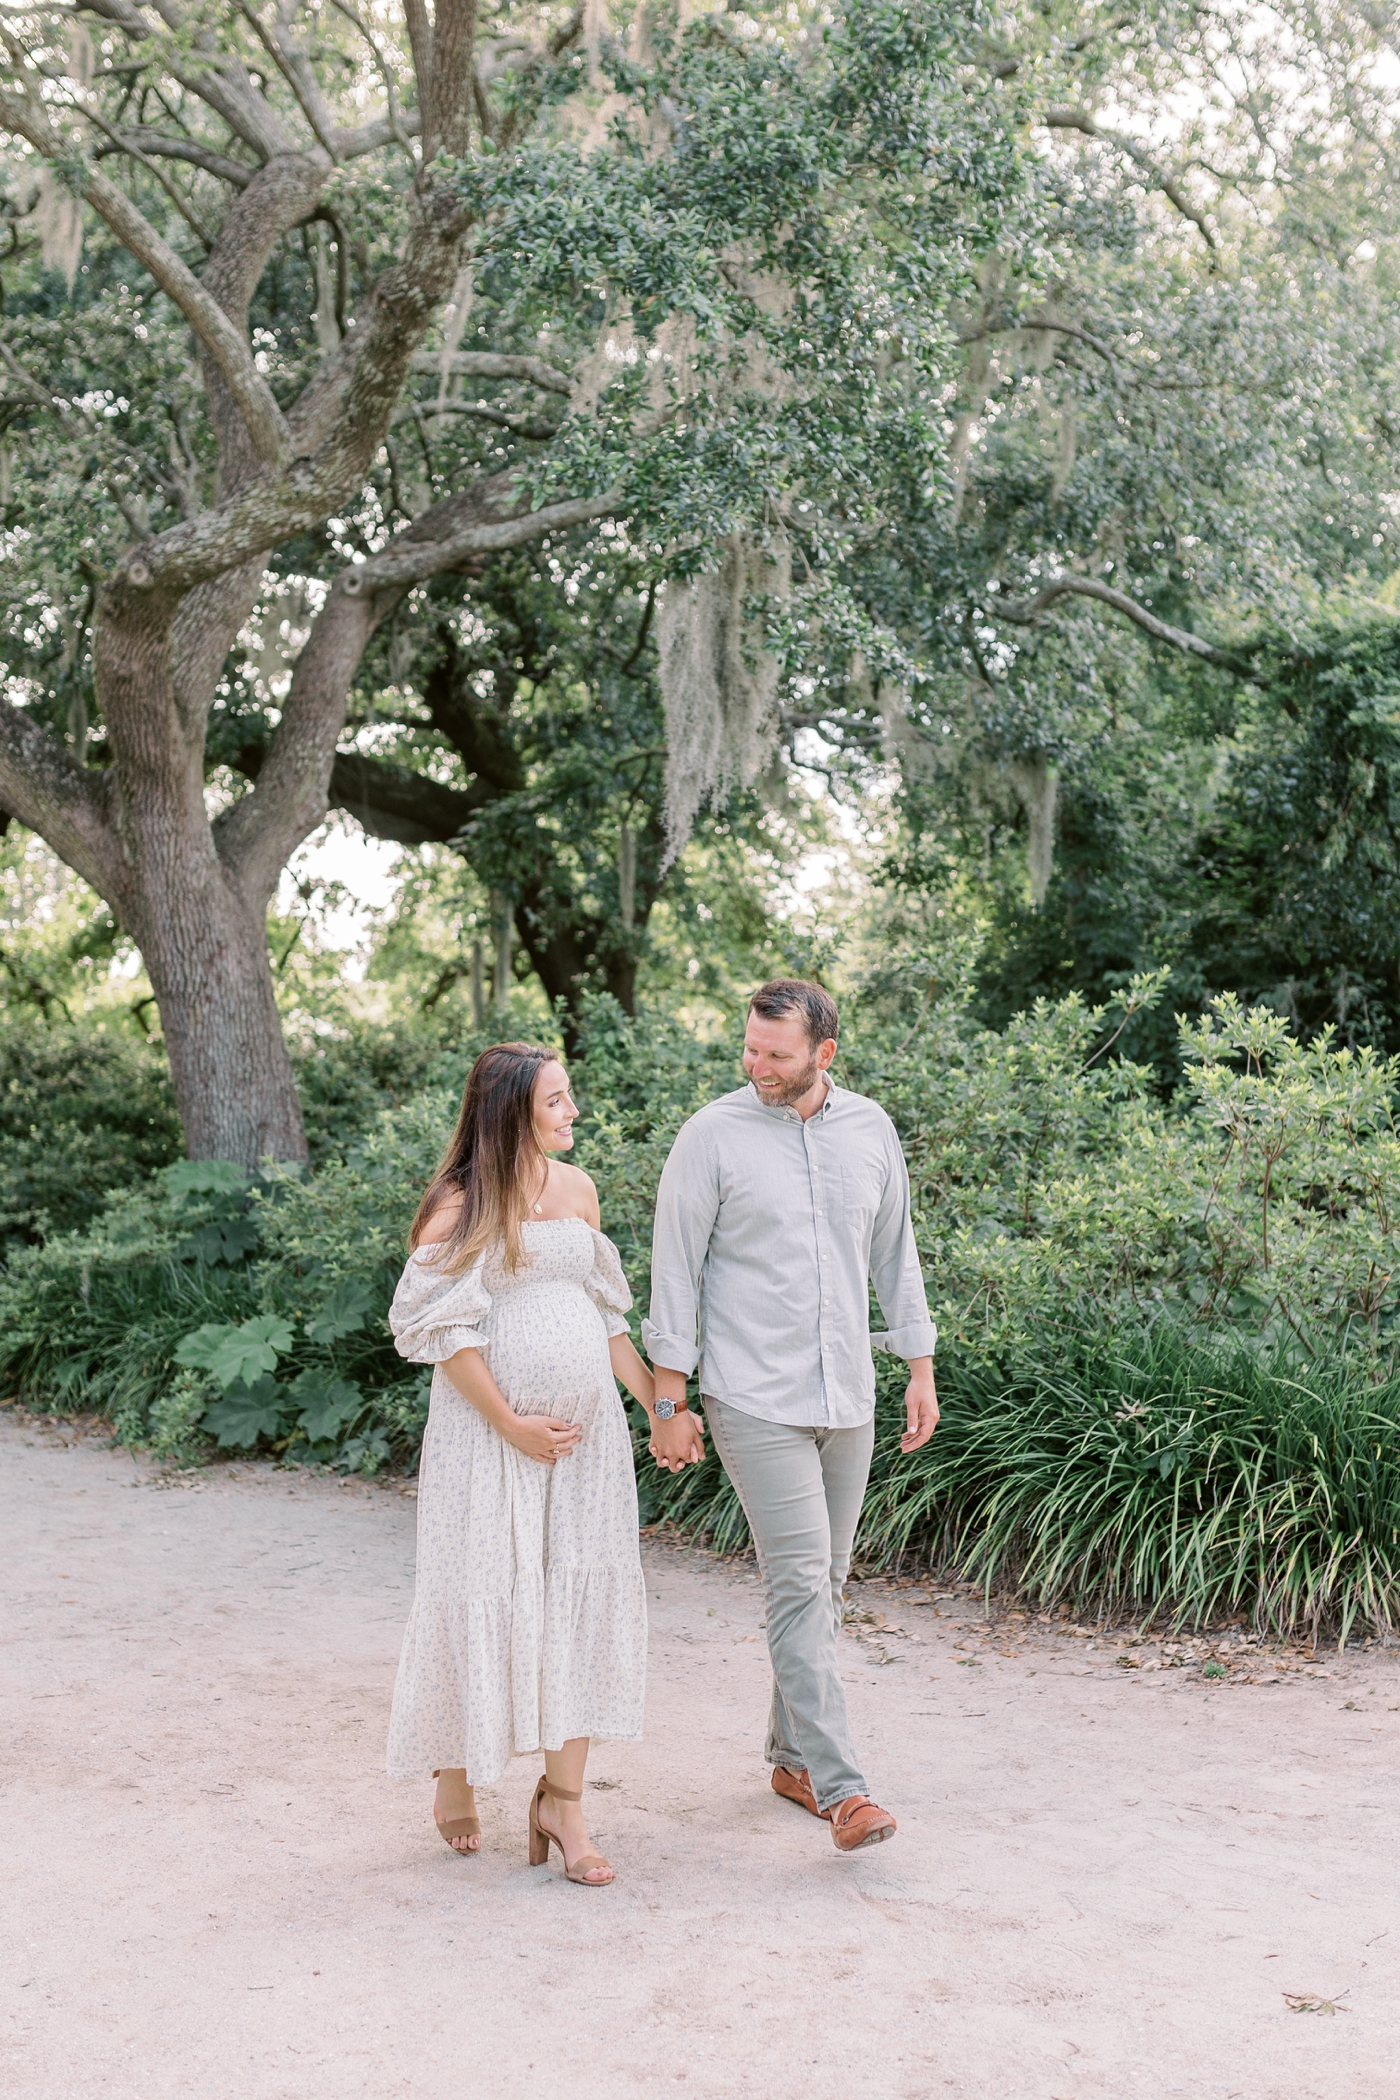 Mom and dad to be walking in Hampton Park | Photo by Caitlyn Motycka